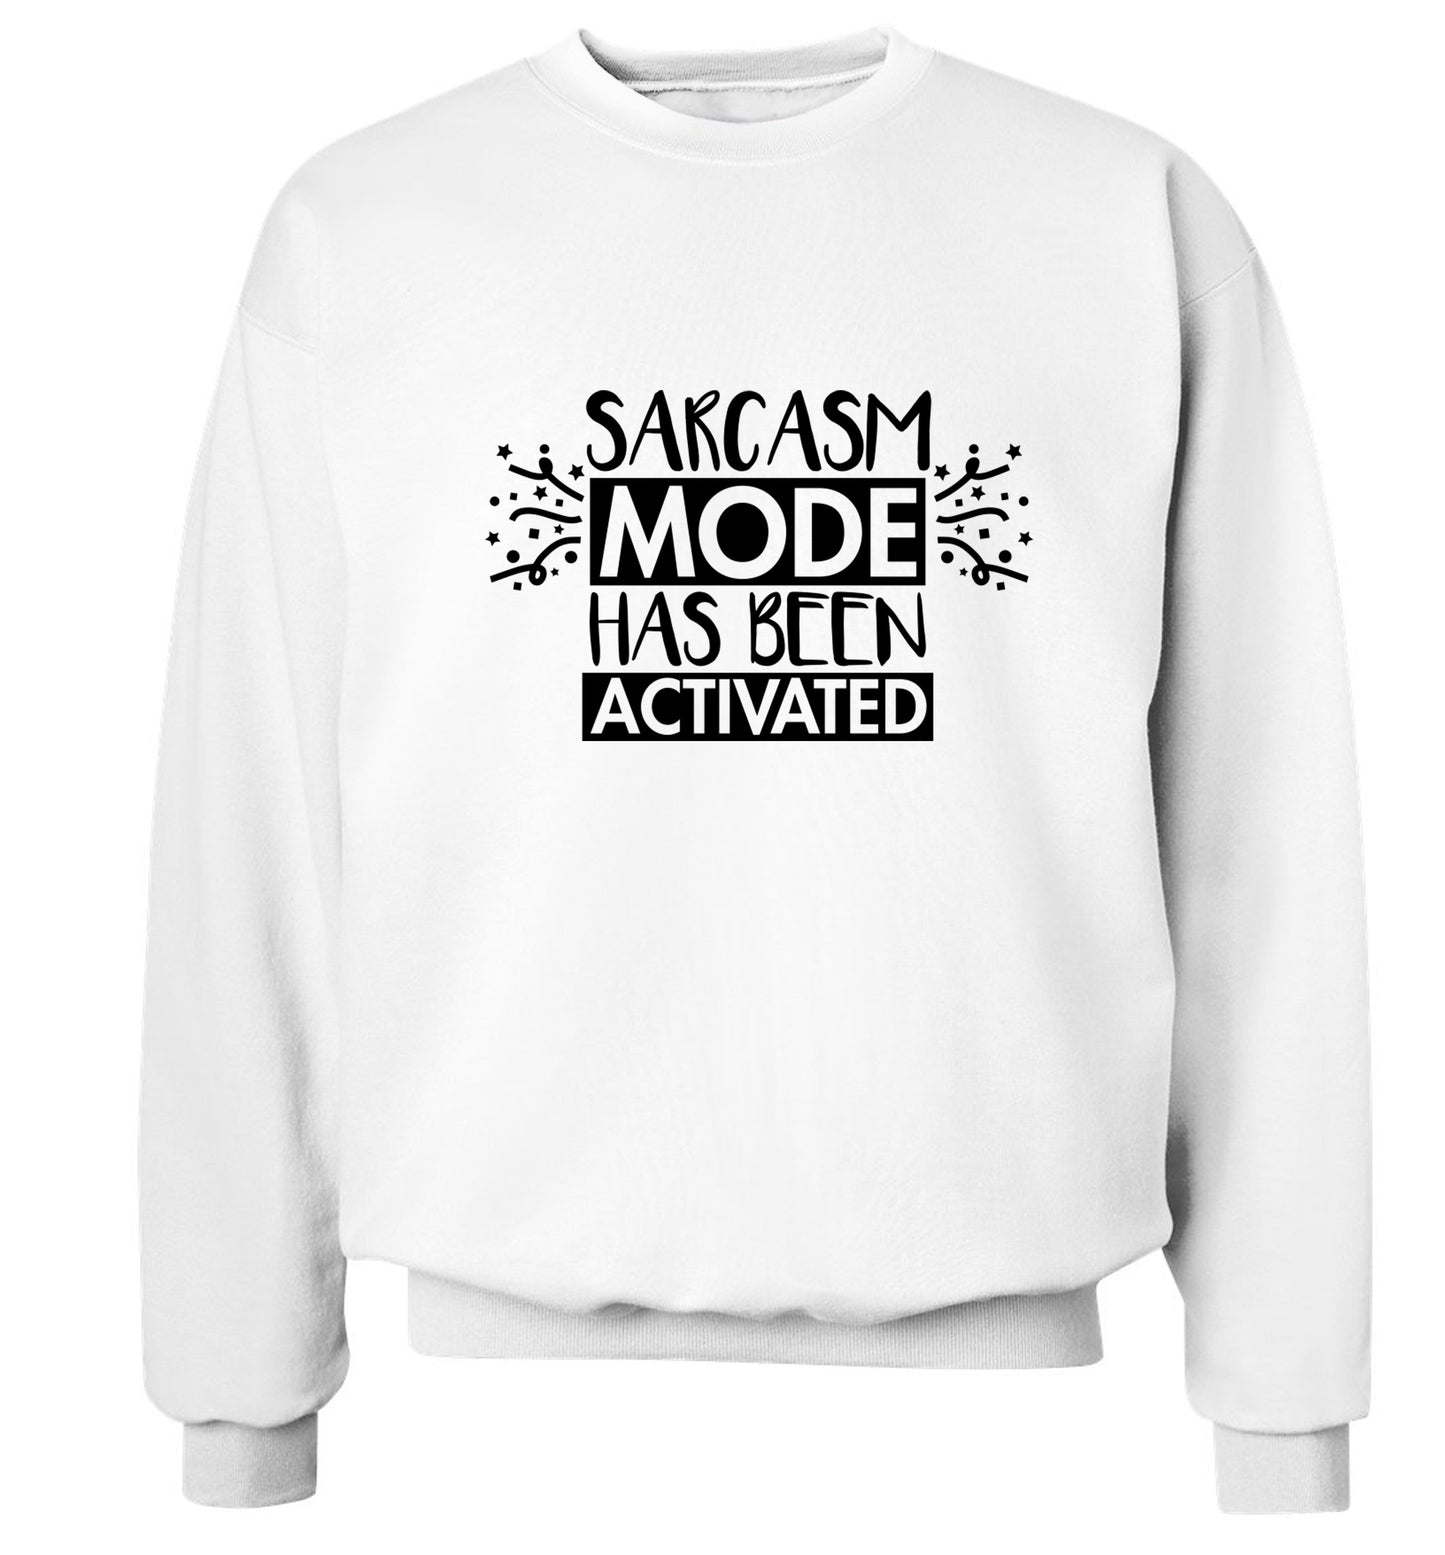 Sarcarsm mode has been activated Adult's unisex white Sweater 2XL